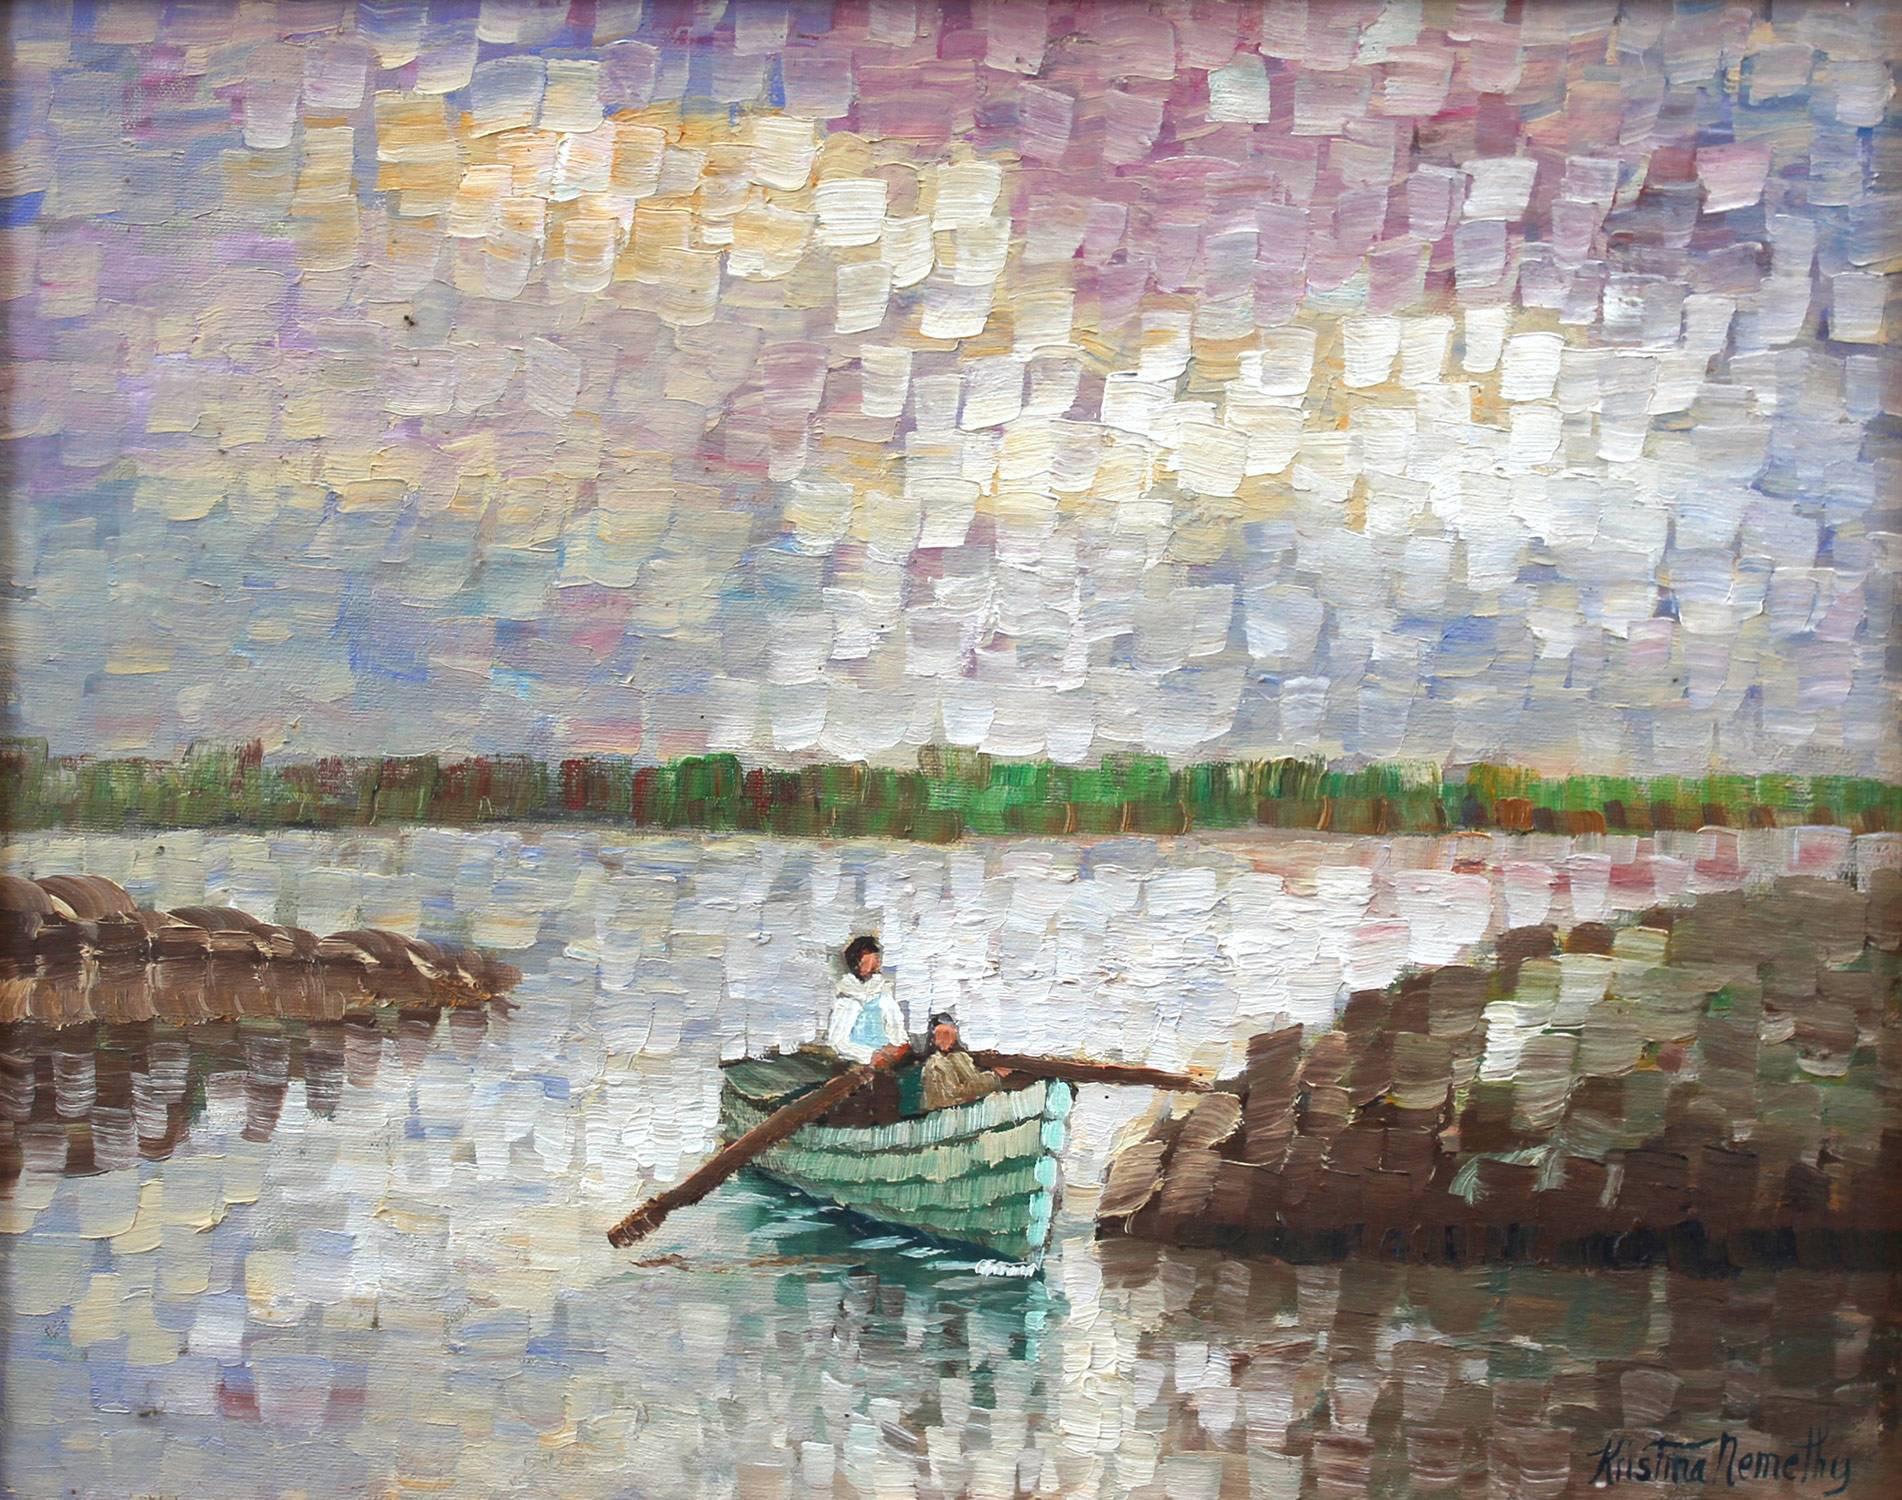 Rowing Through the Lagoon - Painting by Kristina Nemethy